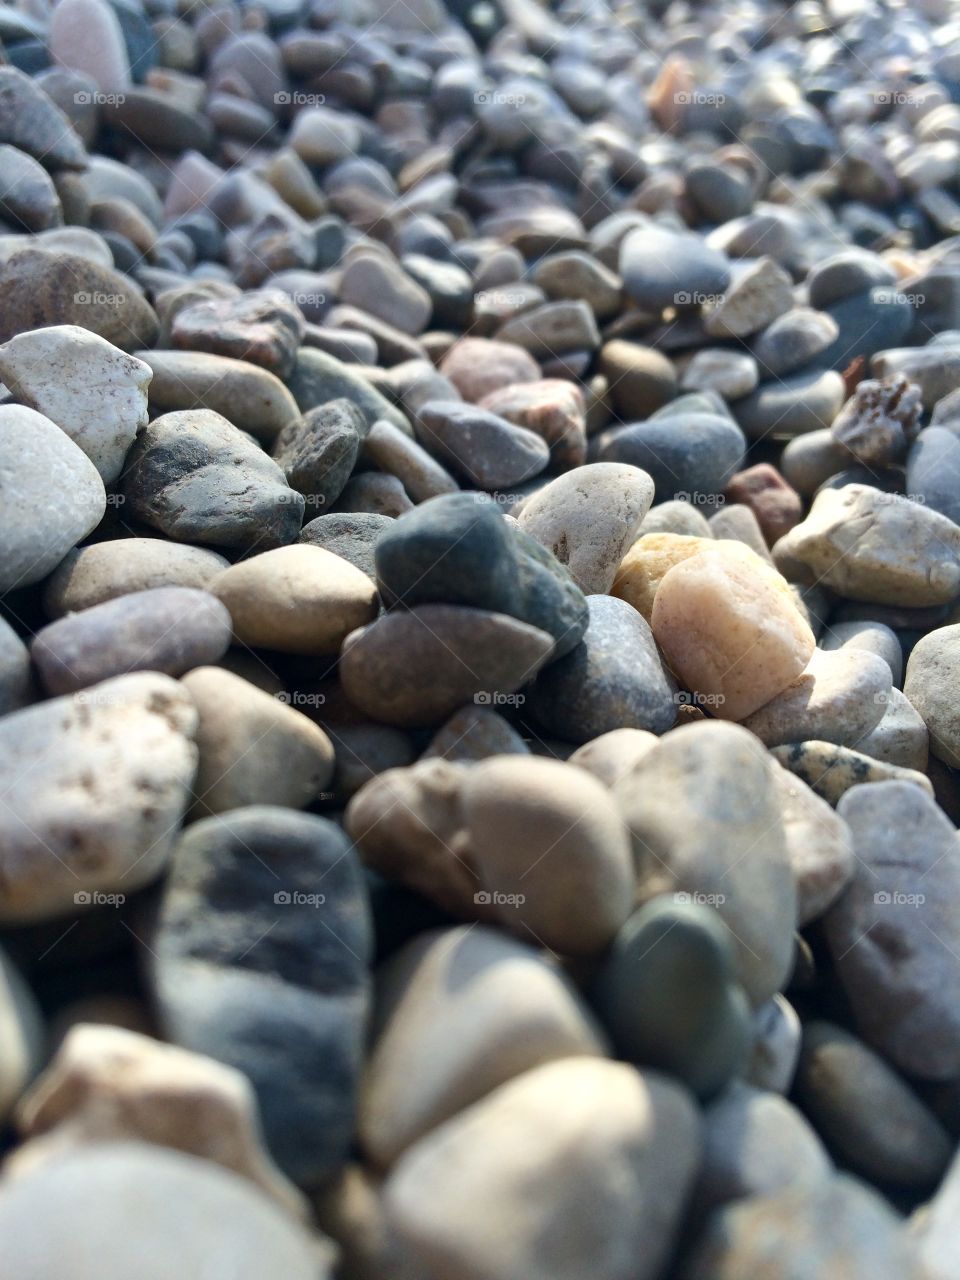 Pebbles in the shade